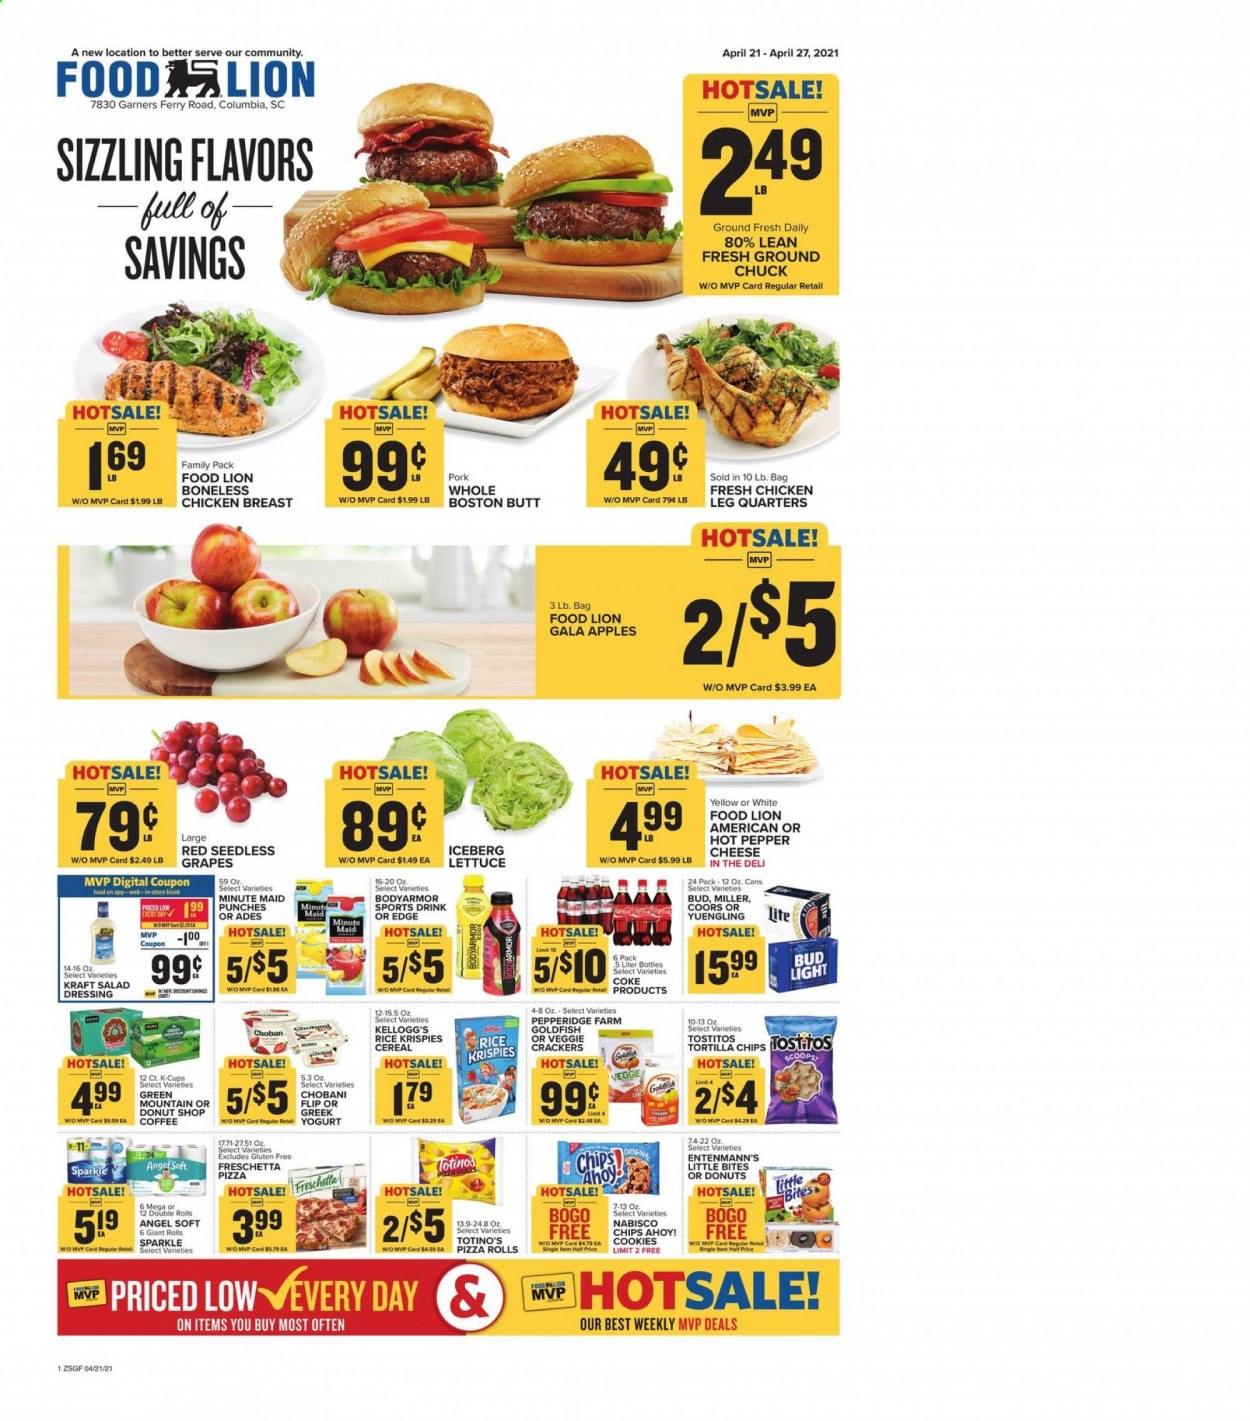 thumbnail - Food Lion Flyer - 04/21/2021 - 04/27/2021 - Sales products - Coors, Yuengling, seedless grapes, pizza rolls, Entenmann's, lettuce, apples, Gala, grapes, pizza, Kraft®, Chobani, cookies, crackers, Kellogg's, Chips Ahoy!, Little Bites, tortilla chips, chips, Goldfish, Tostitos, cereals, Rice Krispies, salad dressing, dressing, fruit punch, coffee, coffee capsules, K-Cups, Green Mountain, beer, Bud Light, Miller, chicken breasts, chicken legs, ground chuck. Page 1.